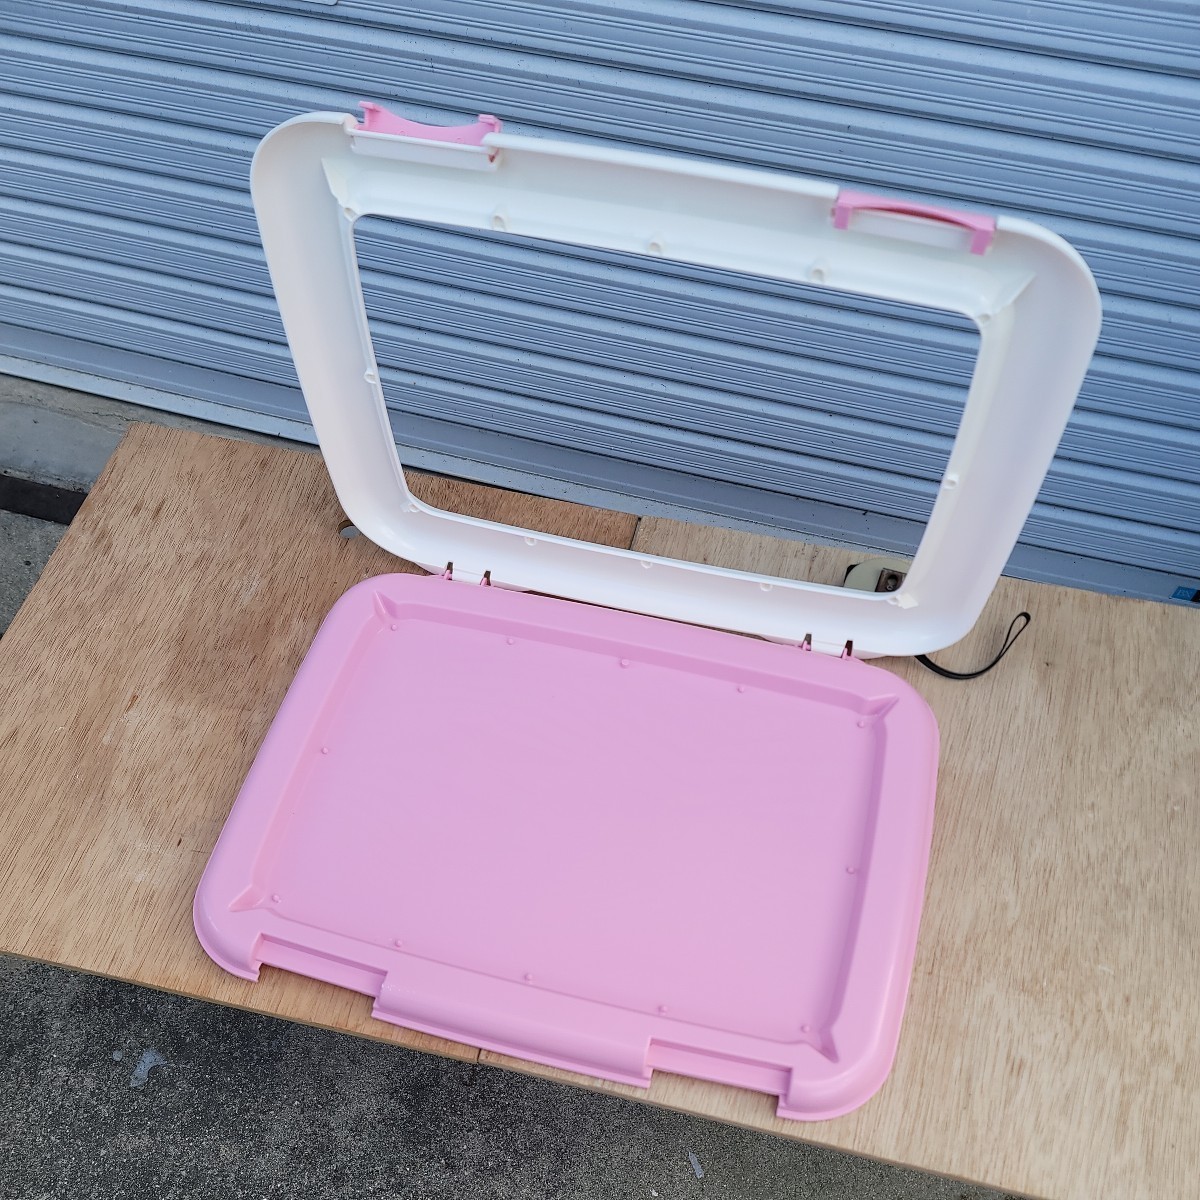  used beautiful goods cheap for pets toilet regular size for Iris o-yama small leak . difficult pet tray FMT-485 love dog .... preparation B